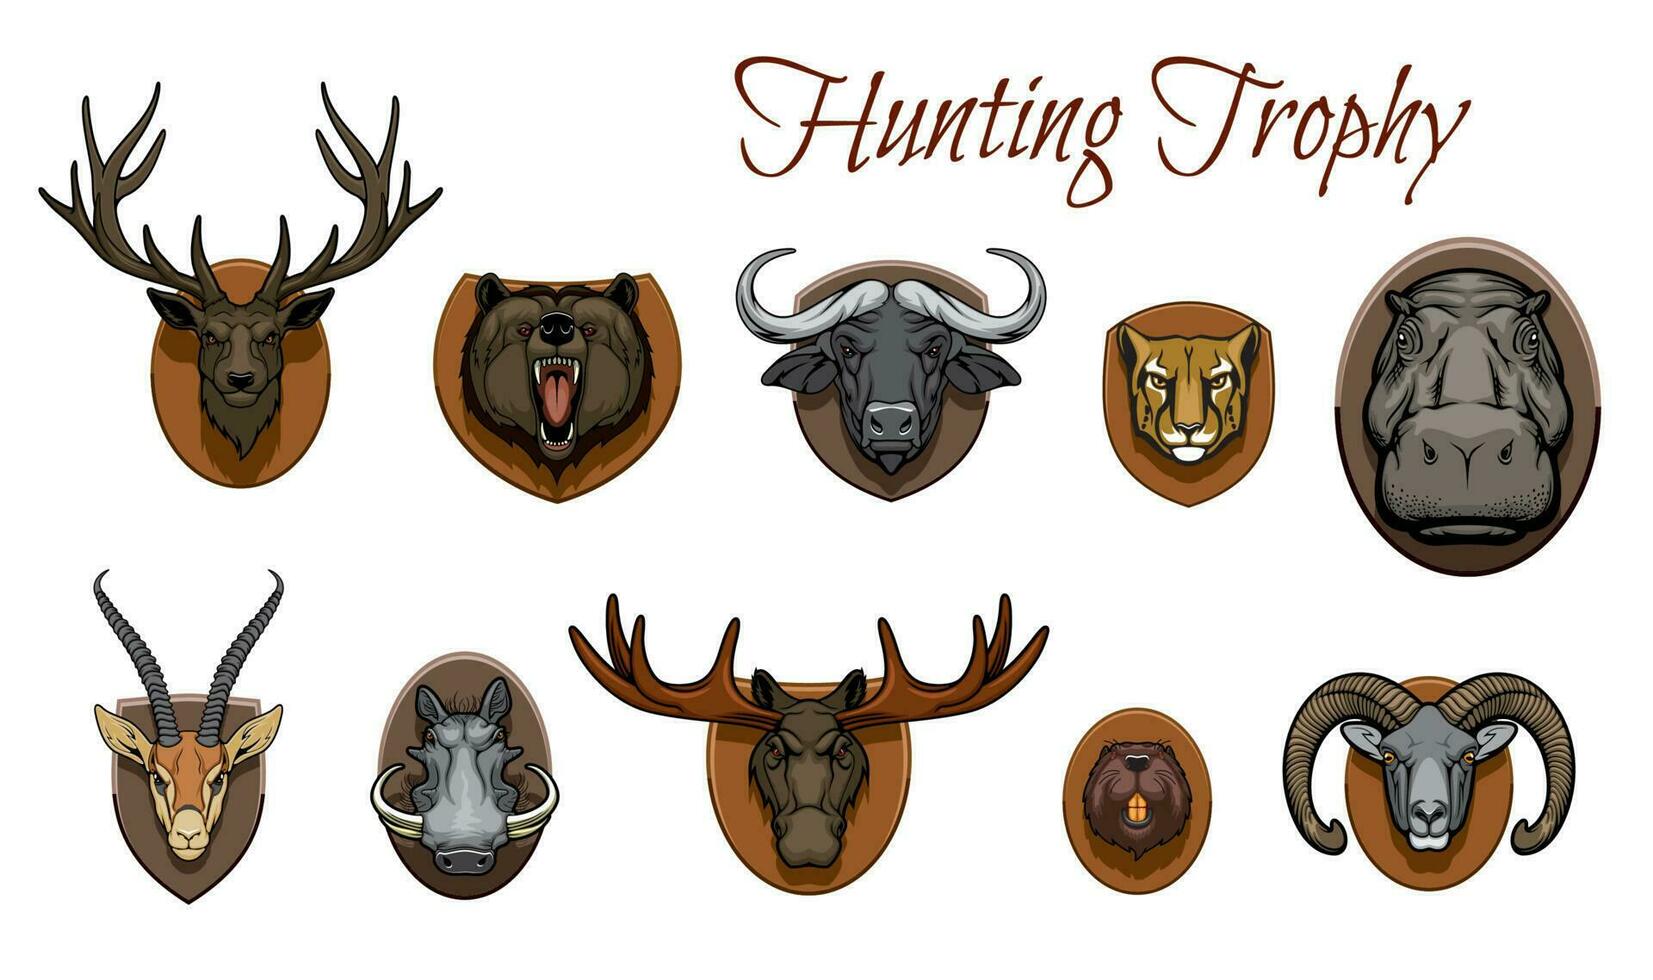 Hunting trophies, hunted animal heads on wall vector